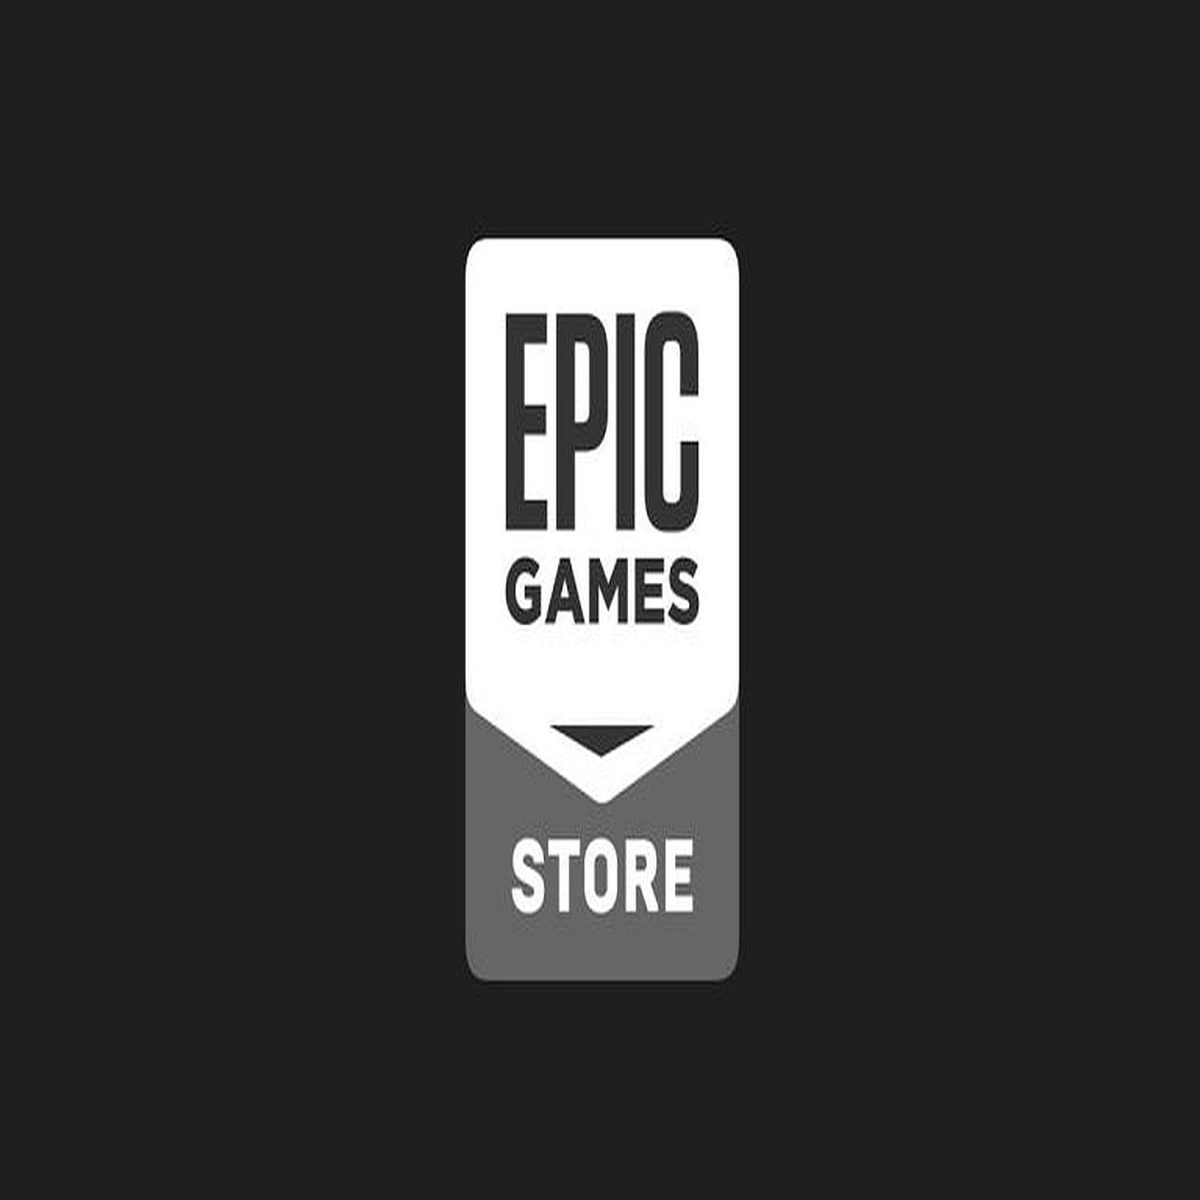 Want free games on Epic Games Store? Now, that will require 2FA